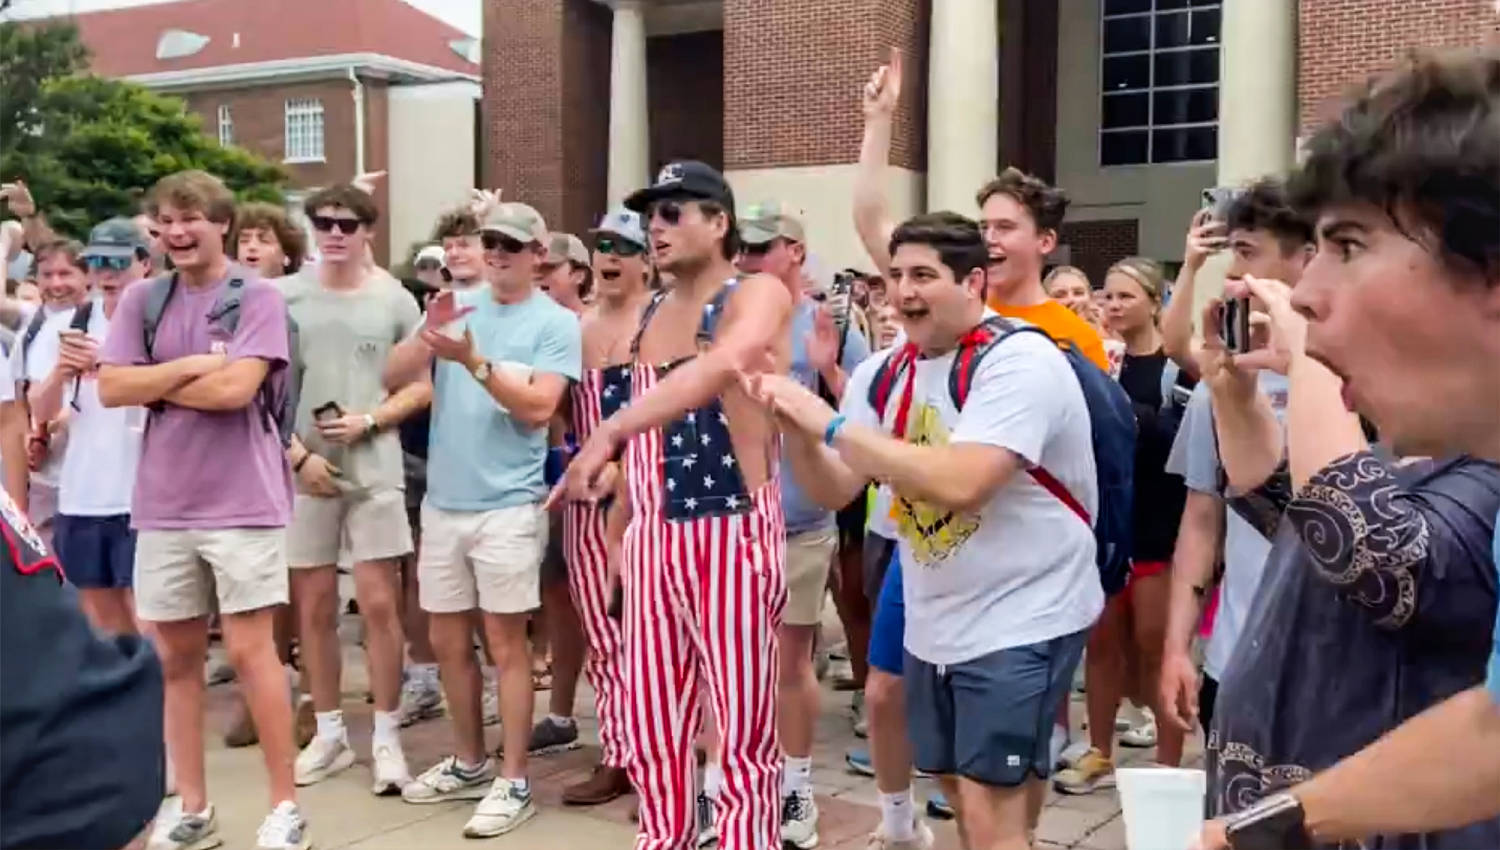 Ole Miss opens conduct investigation following protest confrontation